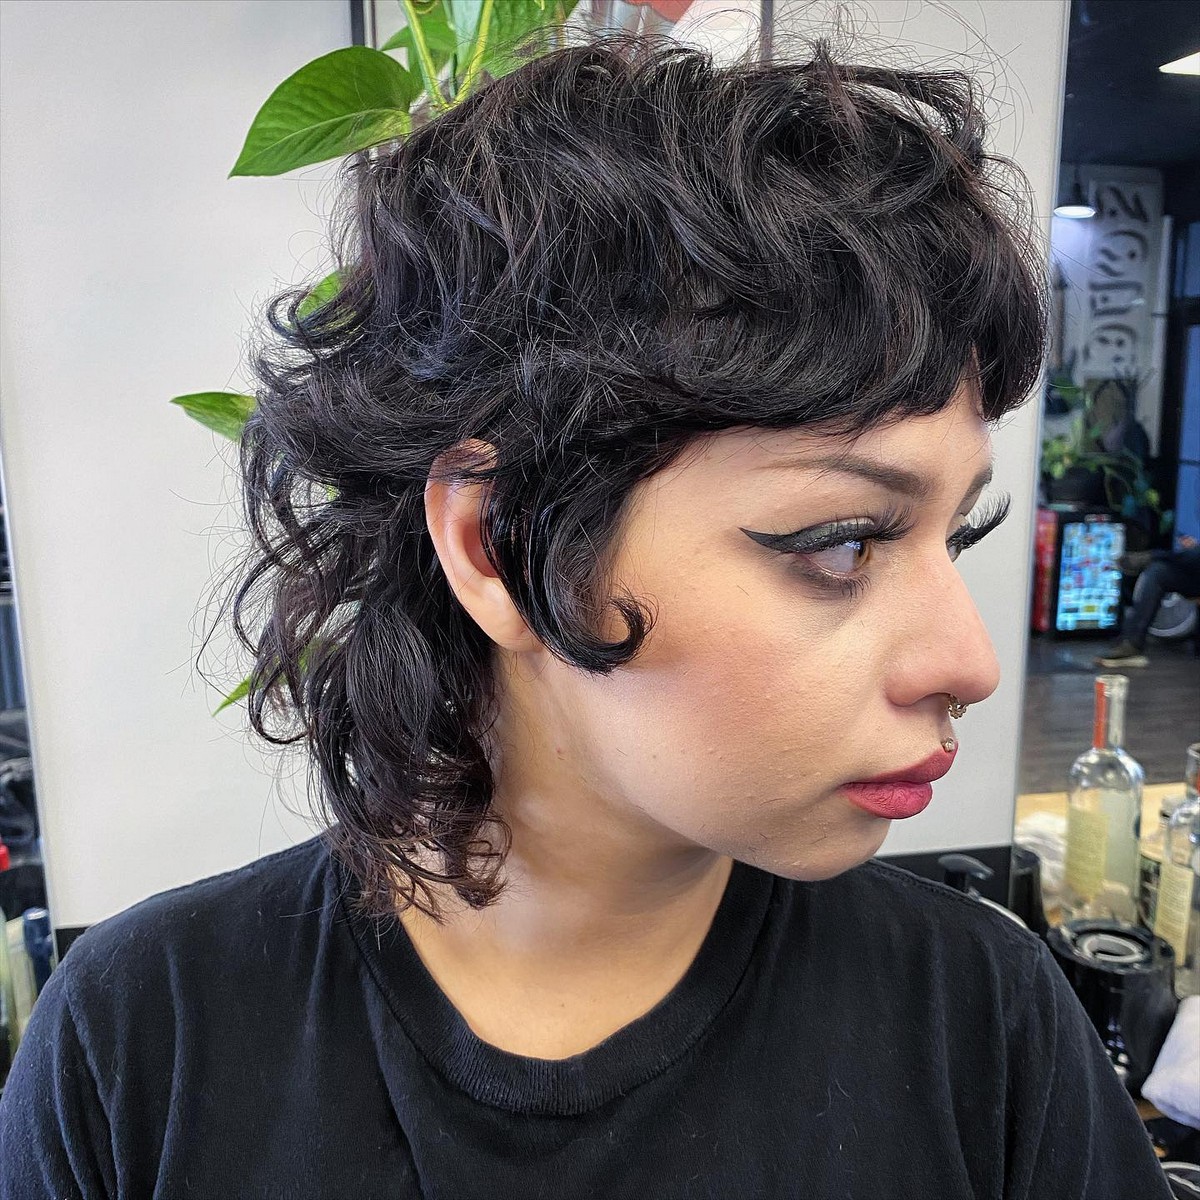 Edgy Curly Mullet